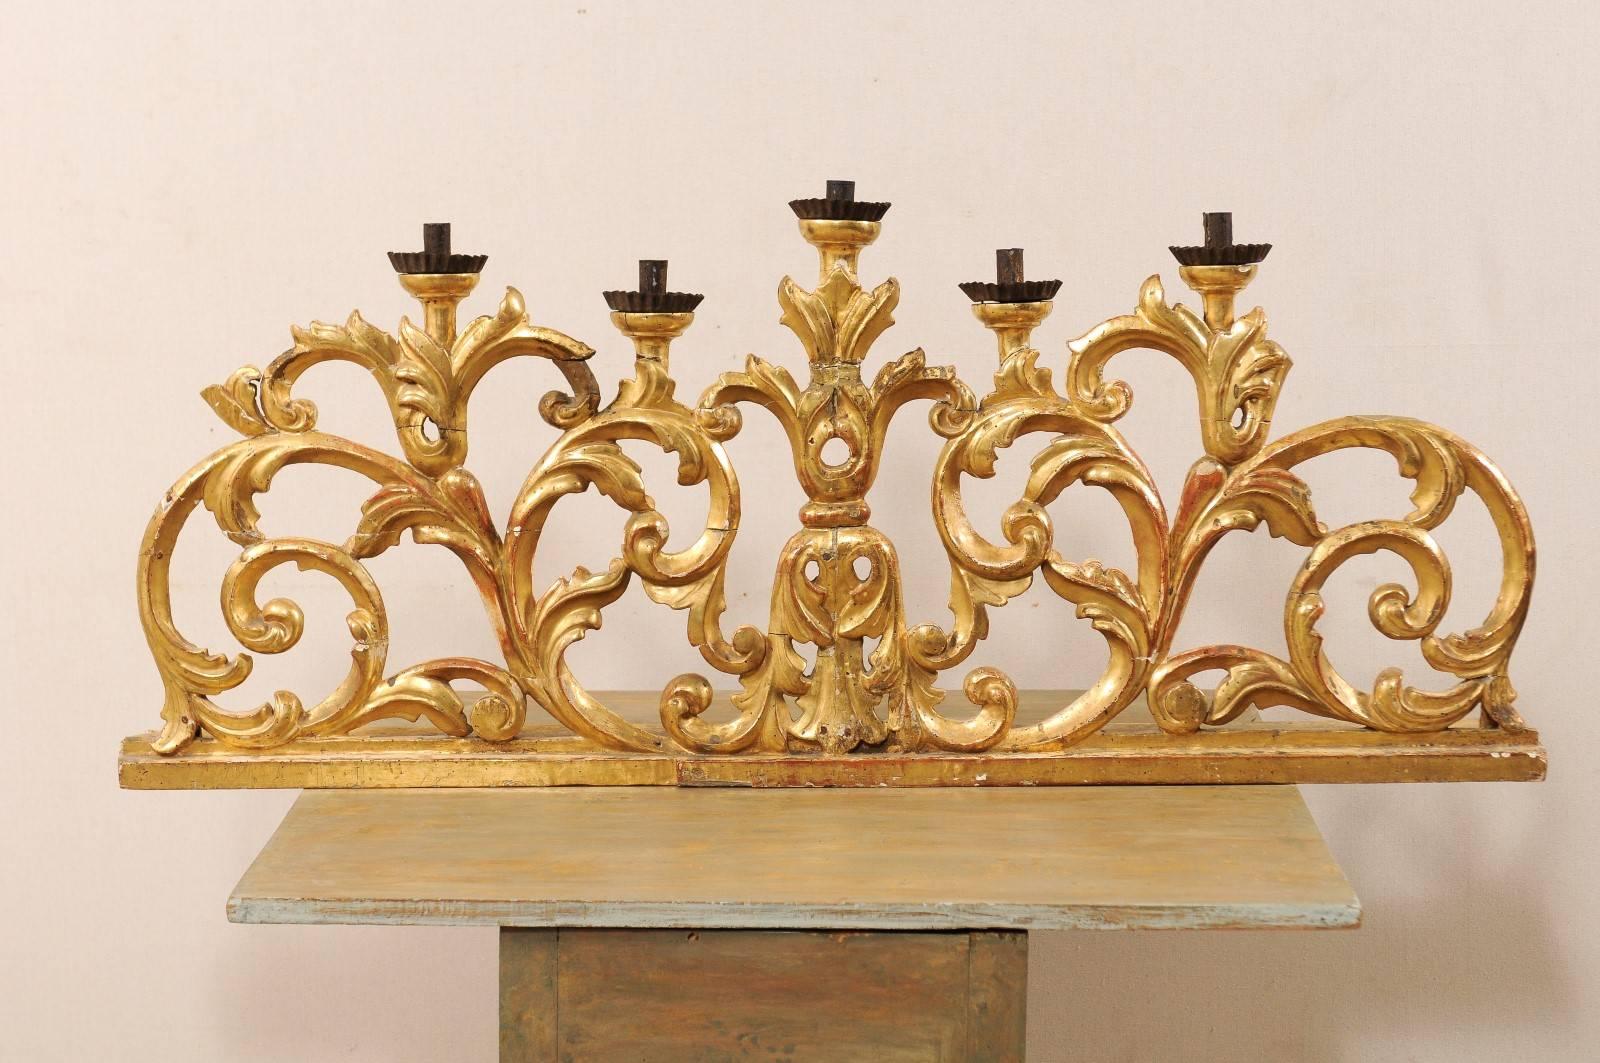 A large pair of Italian 19th century five-light candelabra. This pair of richly carved five-candlestick light candelabras feature gesso and gilt over wood with a beautiful scrolling acanthus leaf motif. The candelabras would work well centered on a